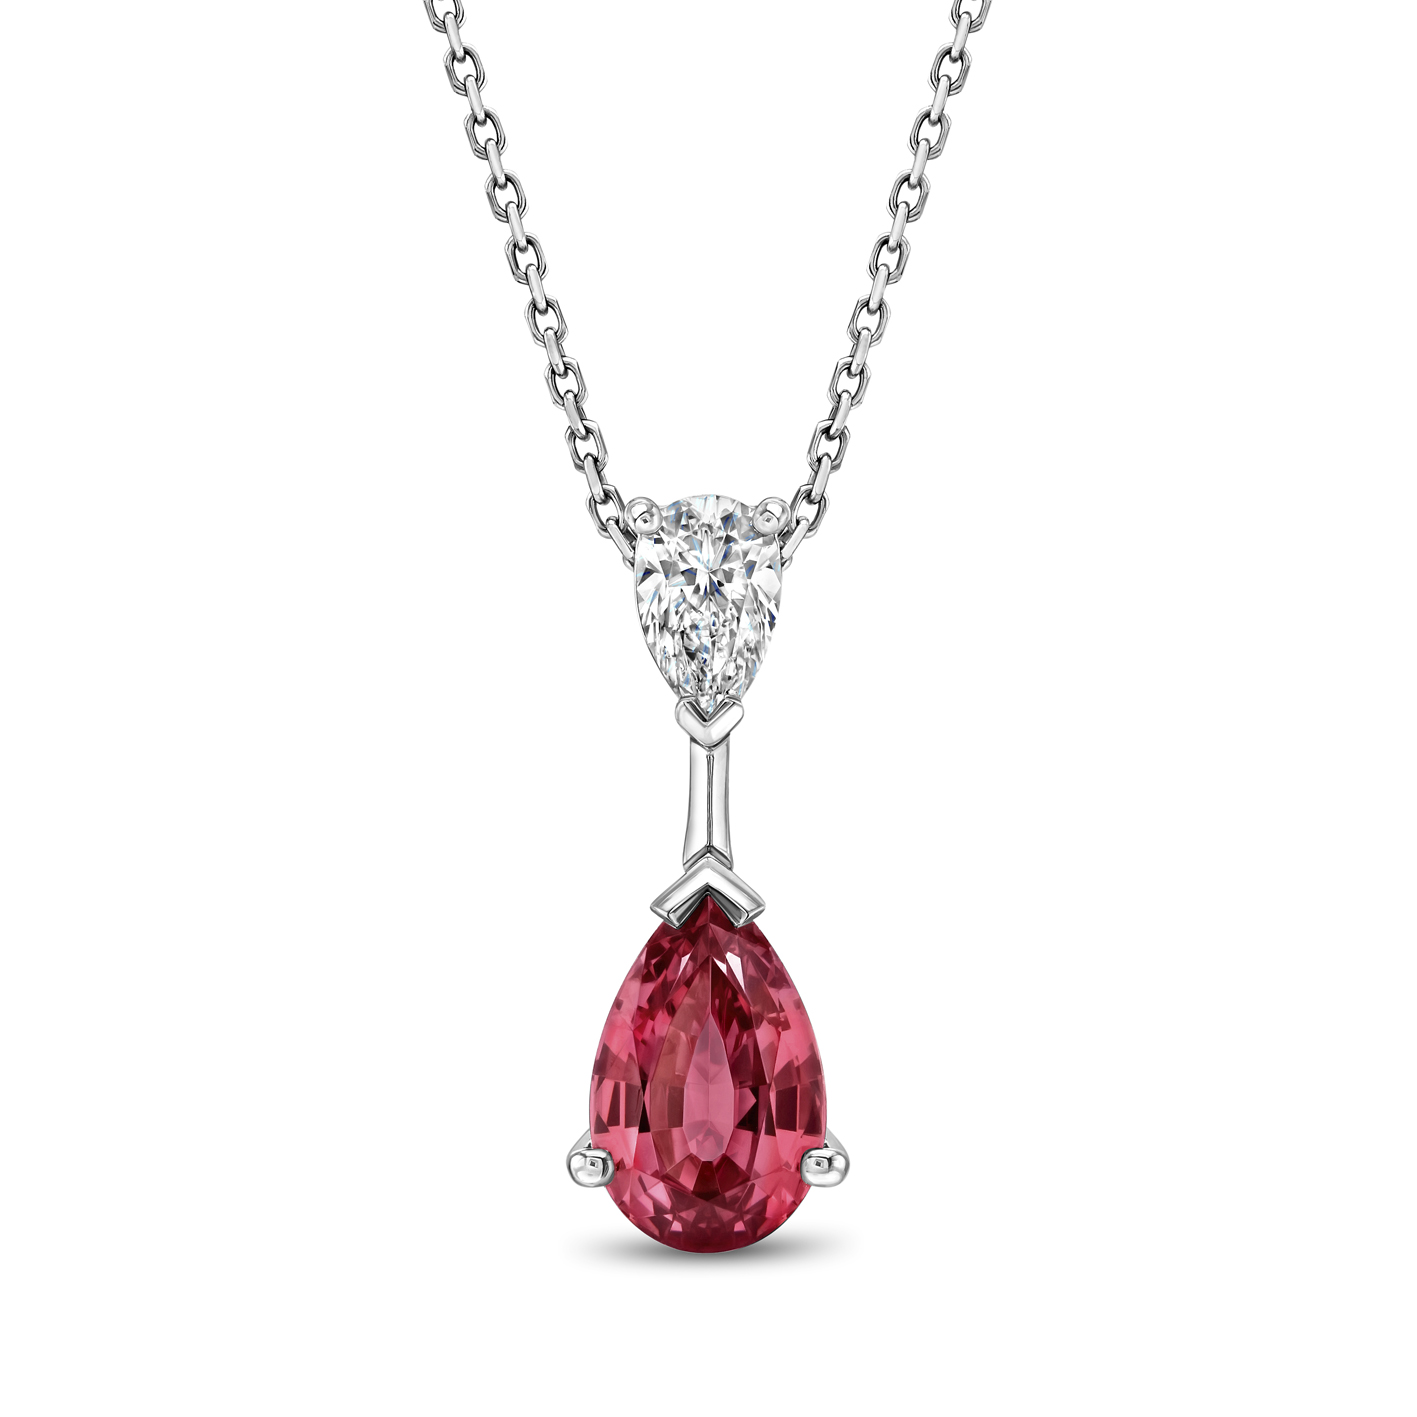 Double pear shaped pendant of hot pink spinel and diamond